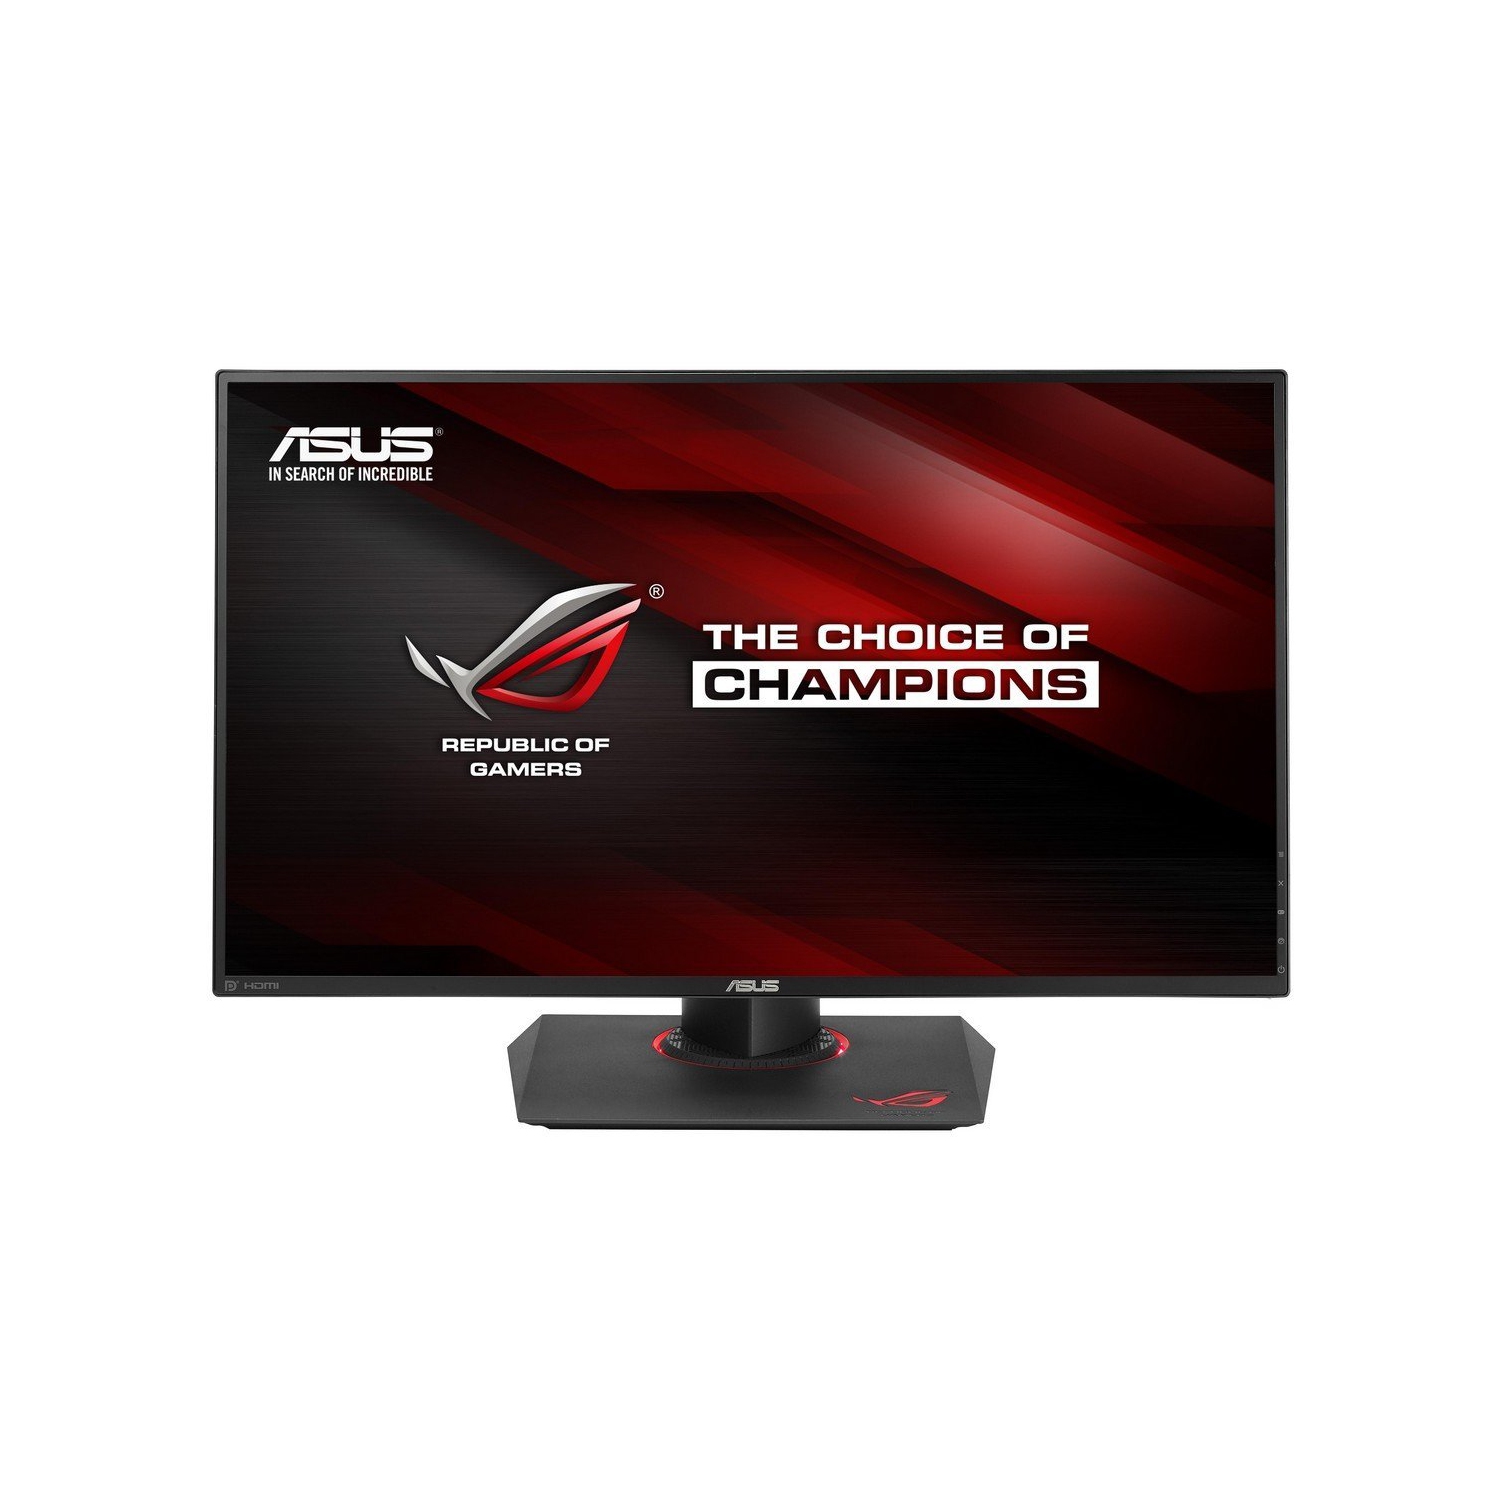 Refurbished (Excellent) - ASUS ROG SWIFT (PG279Q) 27" 165Hz 4ms IPS LED G-SYNC Gaming Monitor Certified Manufacturer Refurbished w/ 90-day ASUS Warranty